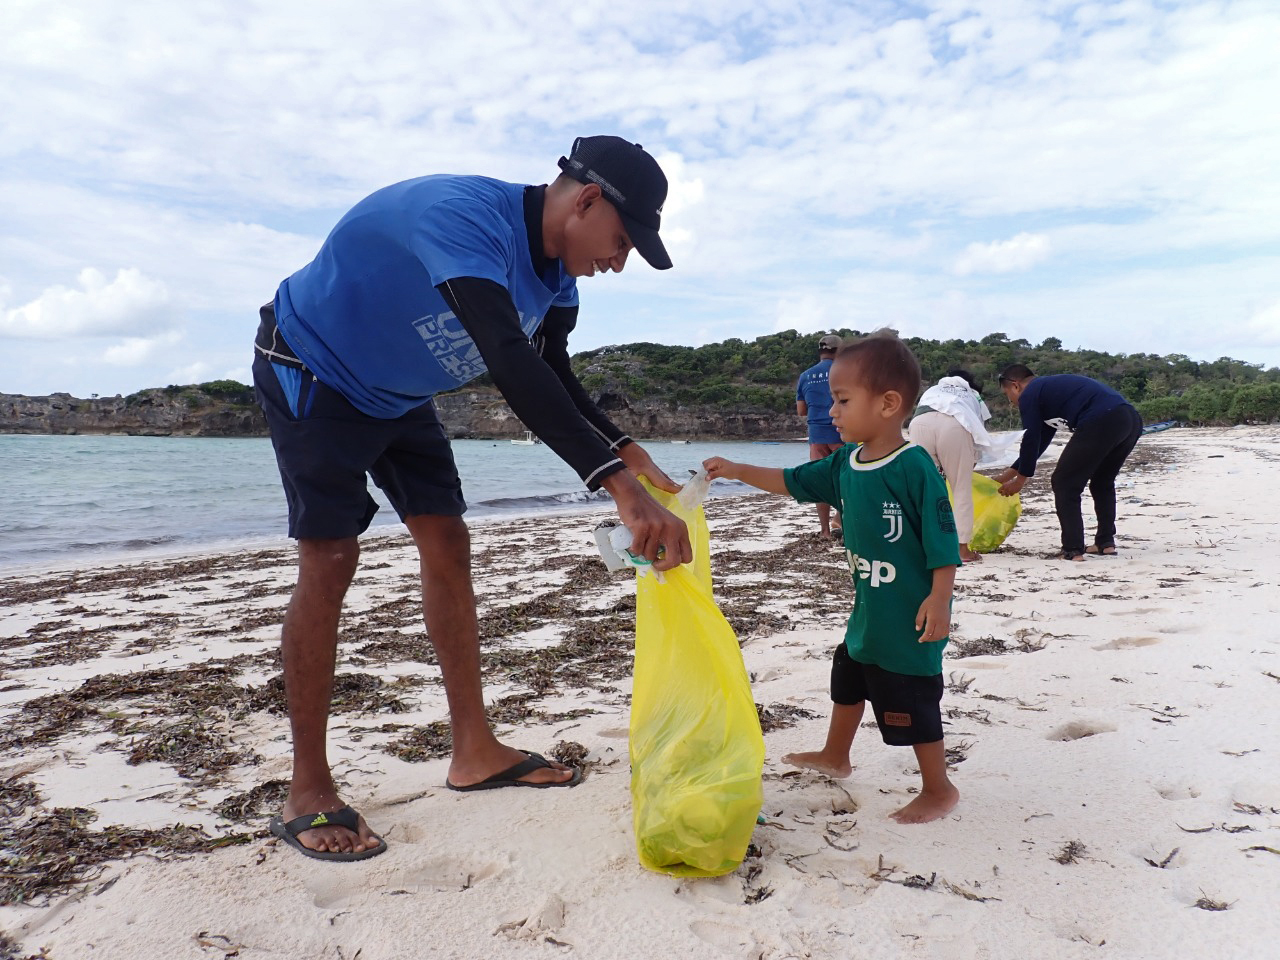 Clean-up day at Oesina Beach, West Kupang, Indonesia.